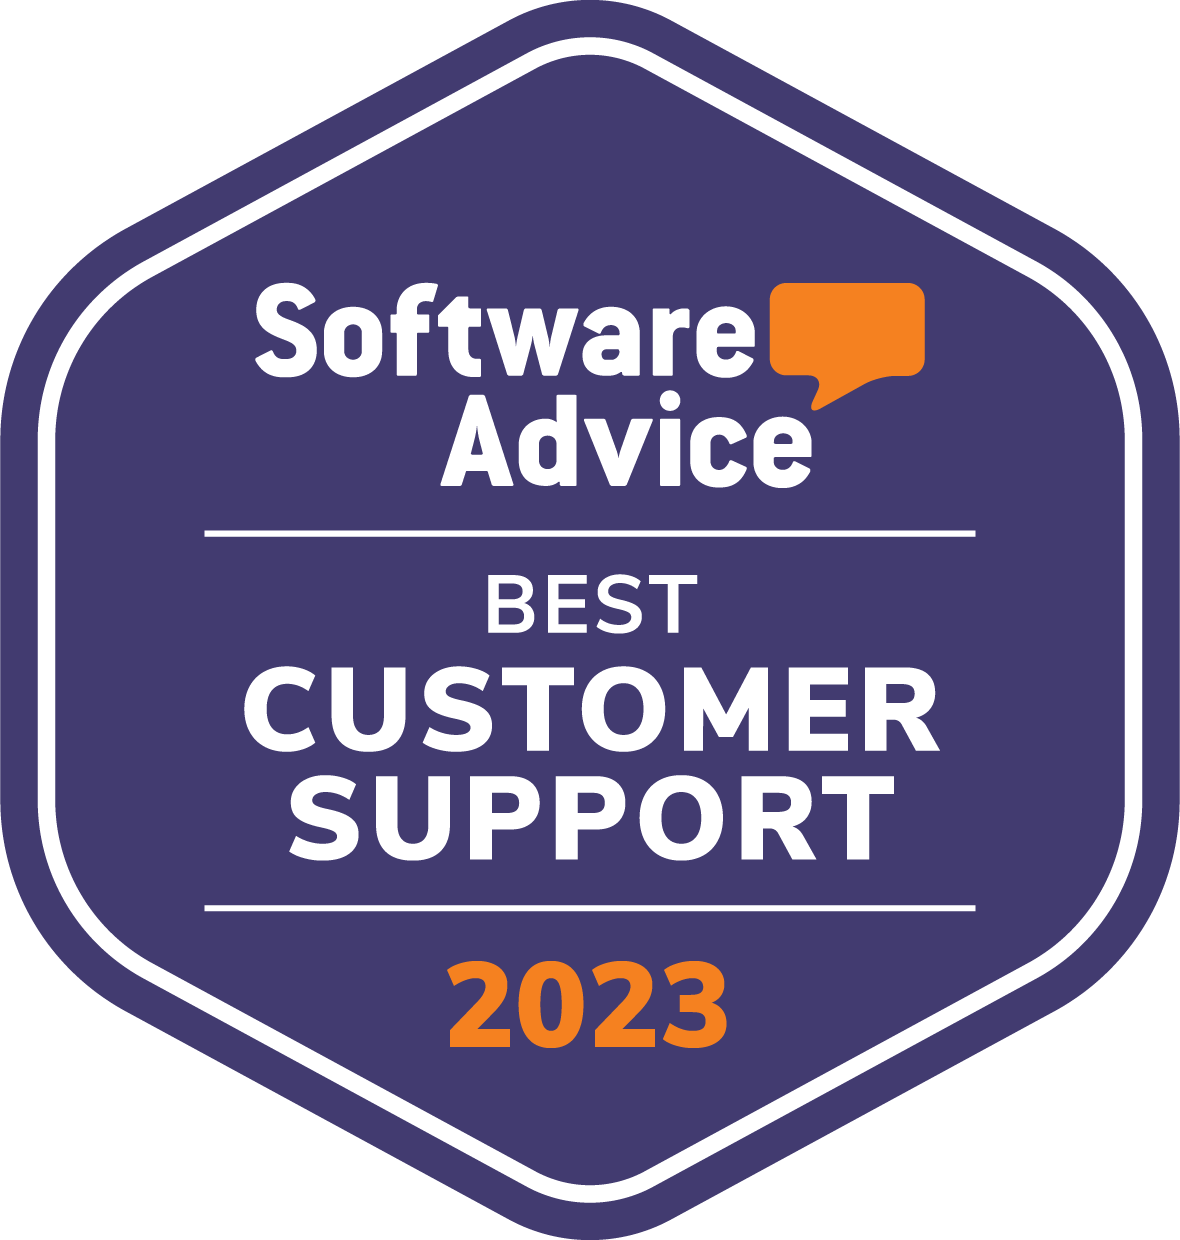 Patriot Payroll is awarded a badge for Best Customer Support 2023 on Software Advice